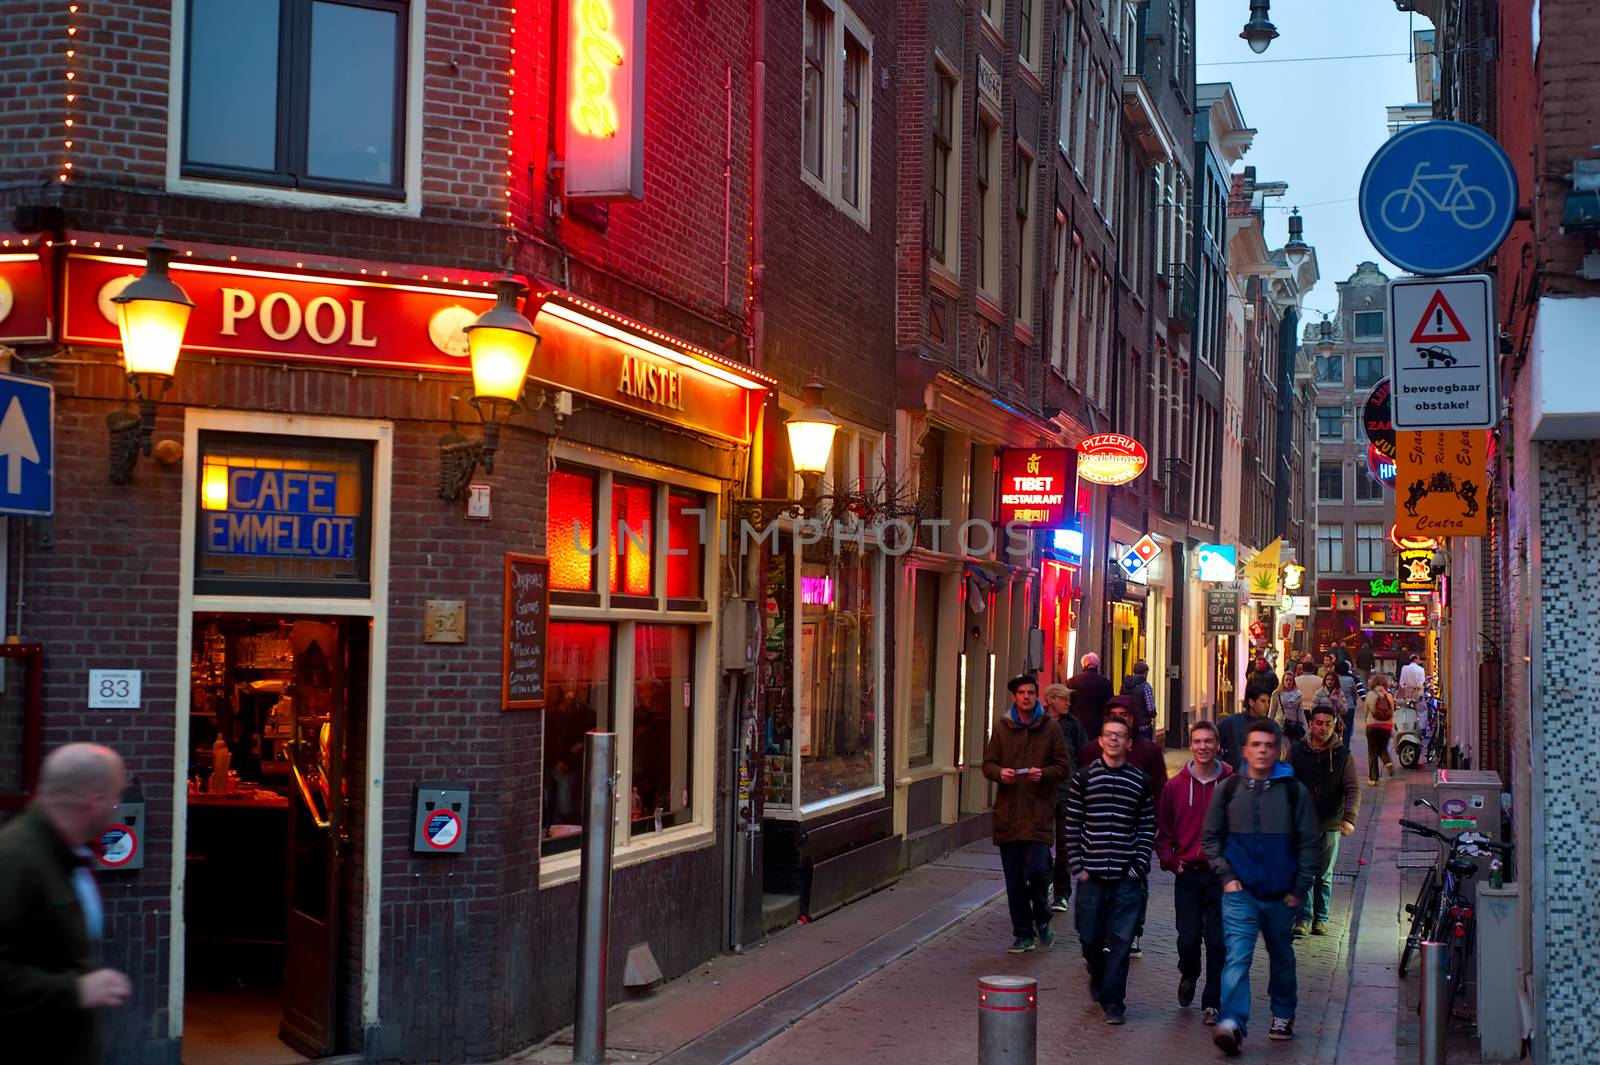 AMSTERDAM, NETHERLANDS - MARCH 10, 2014: People at Old Town street in Amsterdam. Amsterdam is the capital city of and the most populous within the Kingdom of the Netherlands